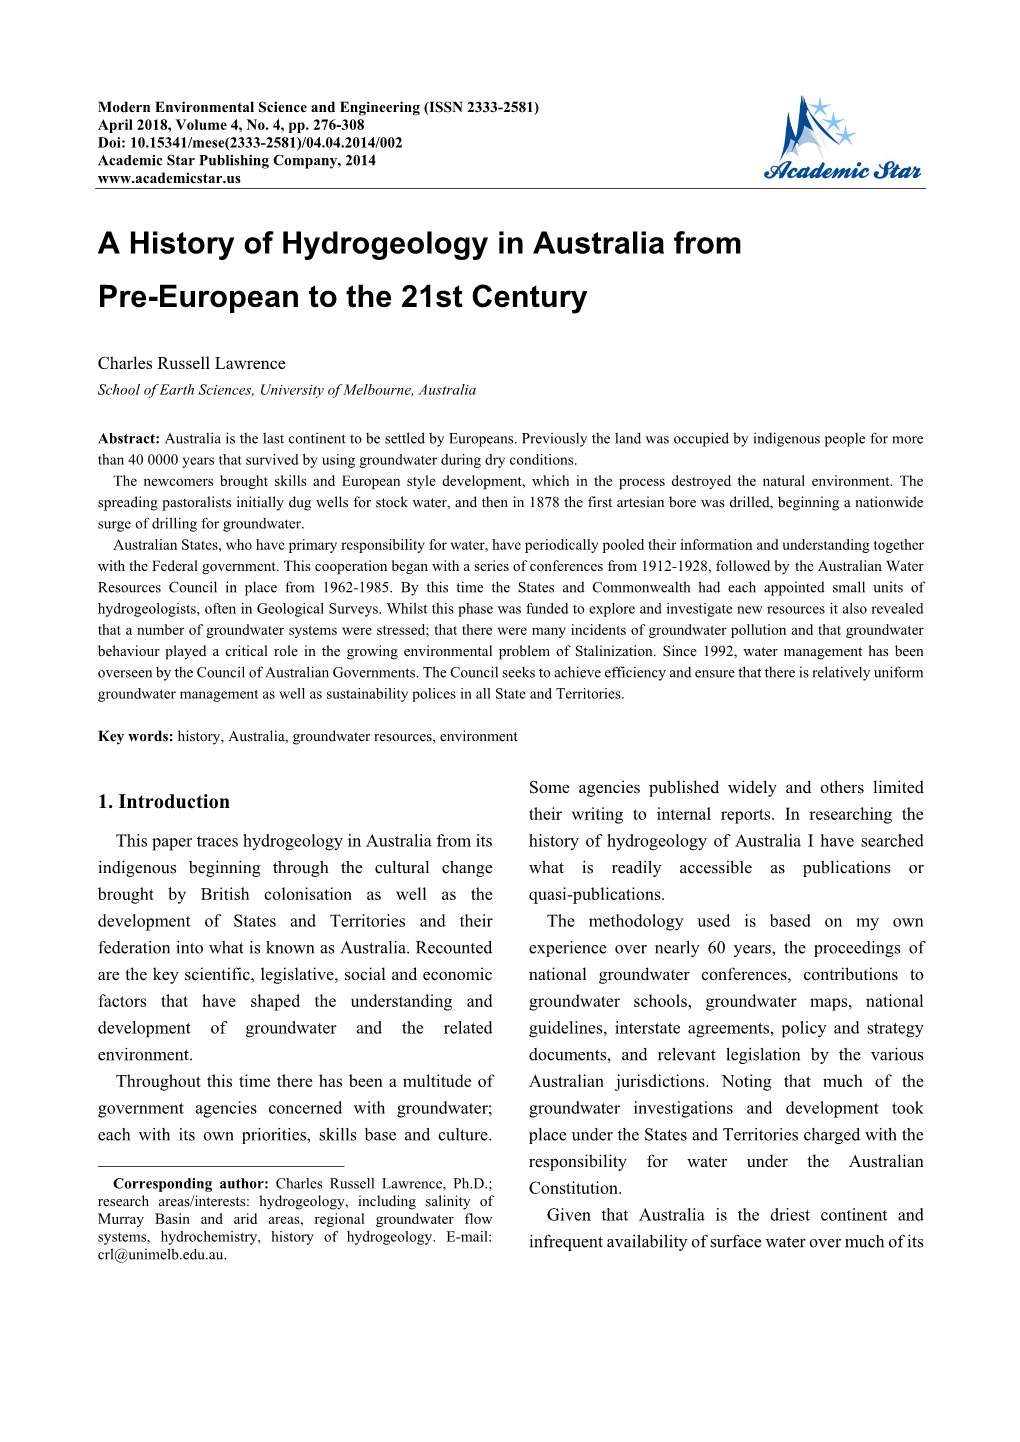 A History of Hydrogeology in Australia from Pre-European to the 21St Century